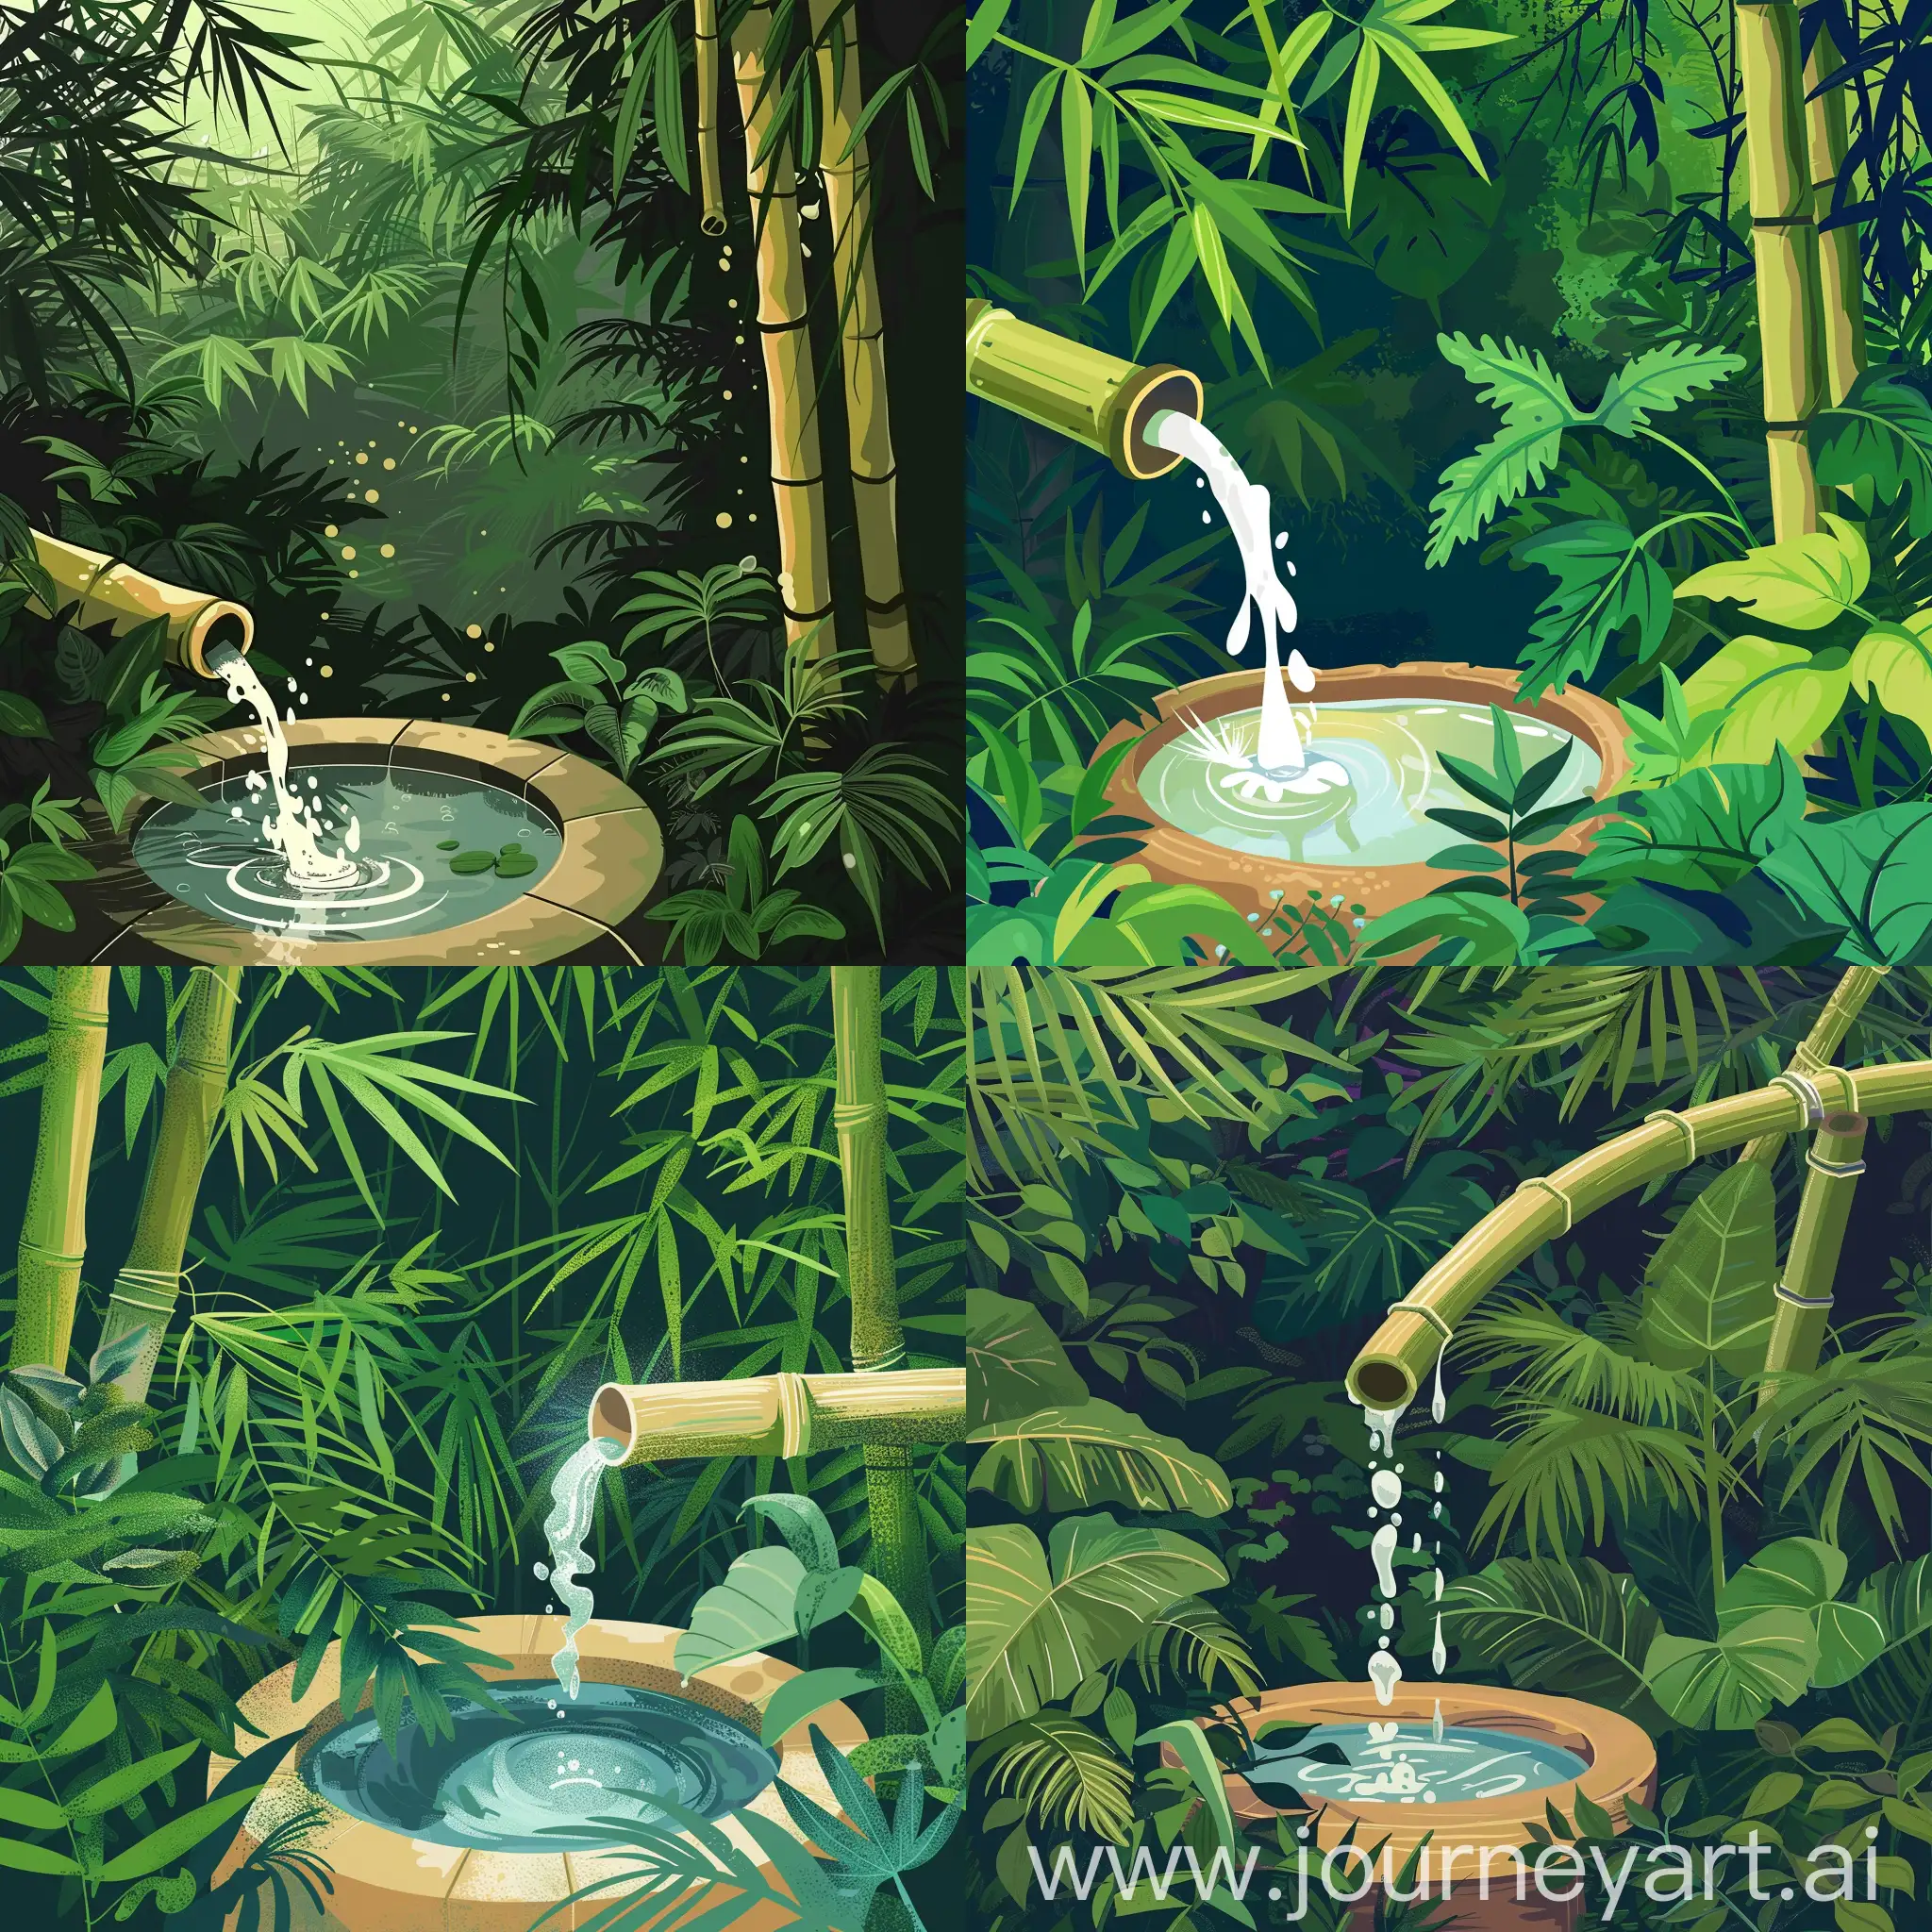 Create an illustration depicting a tranquil scene with a bamboo fountain leaking water, surrounded by lush greenery, embodying the essence of spa relaxation and wellness.